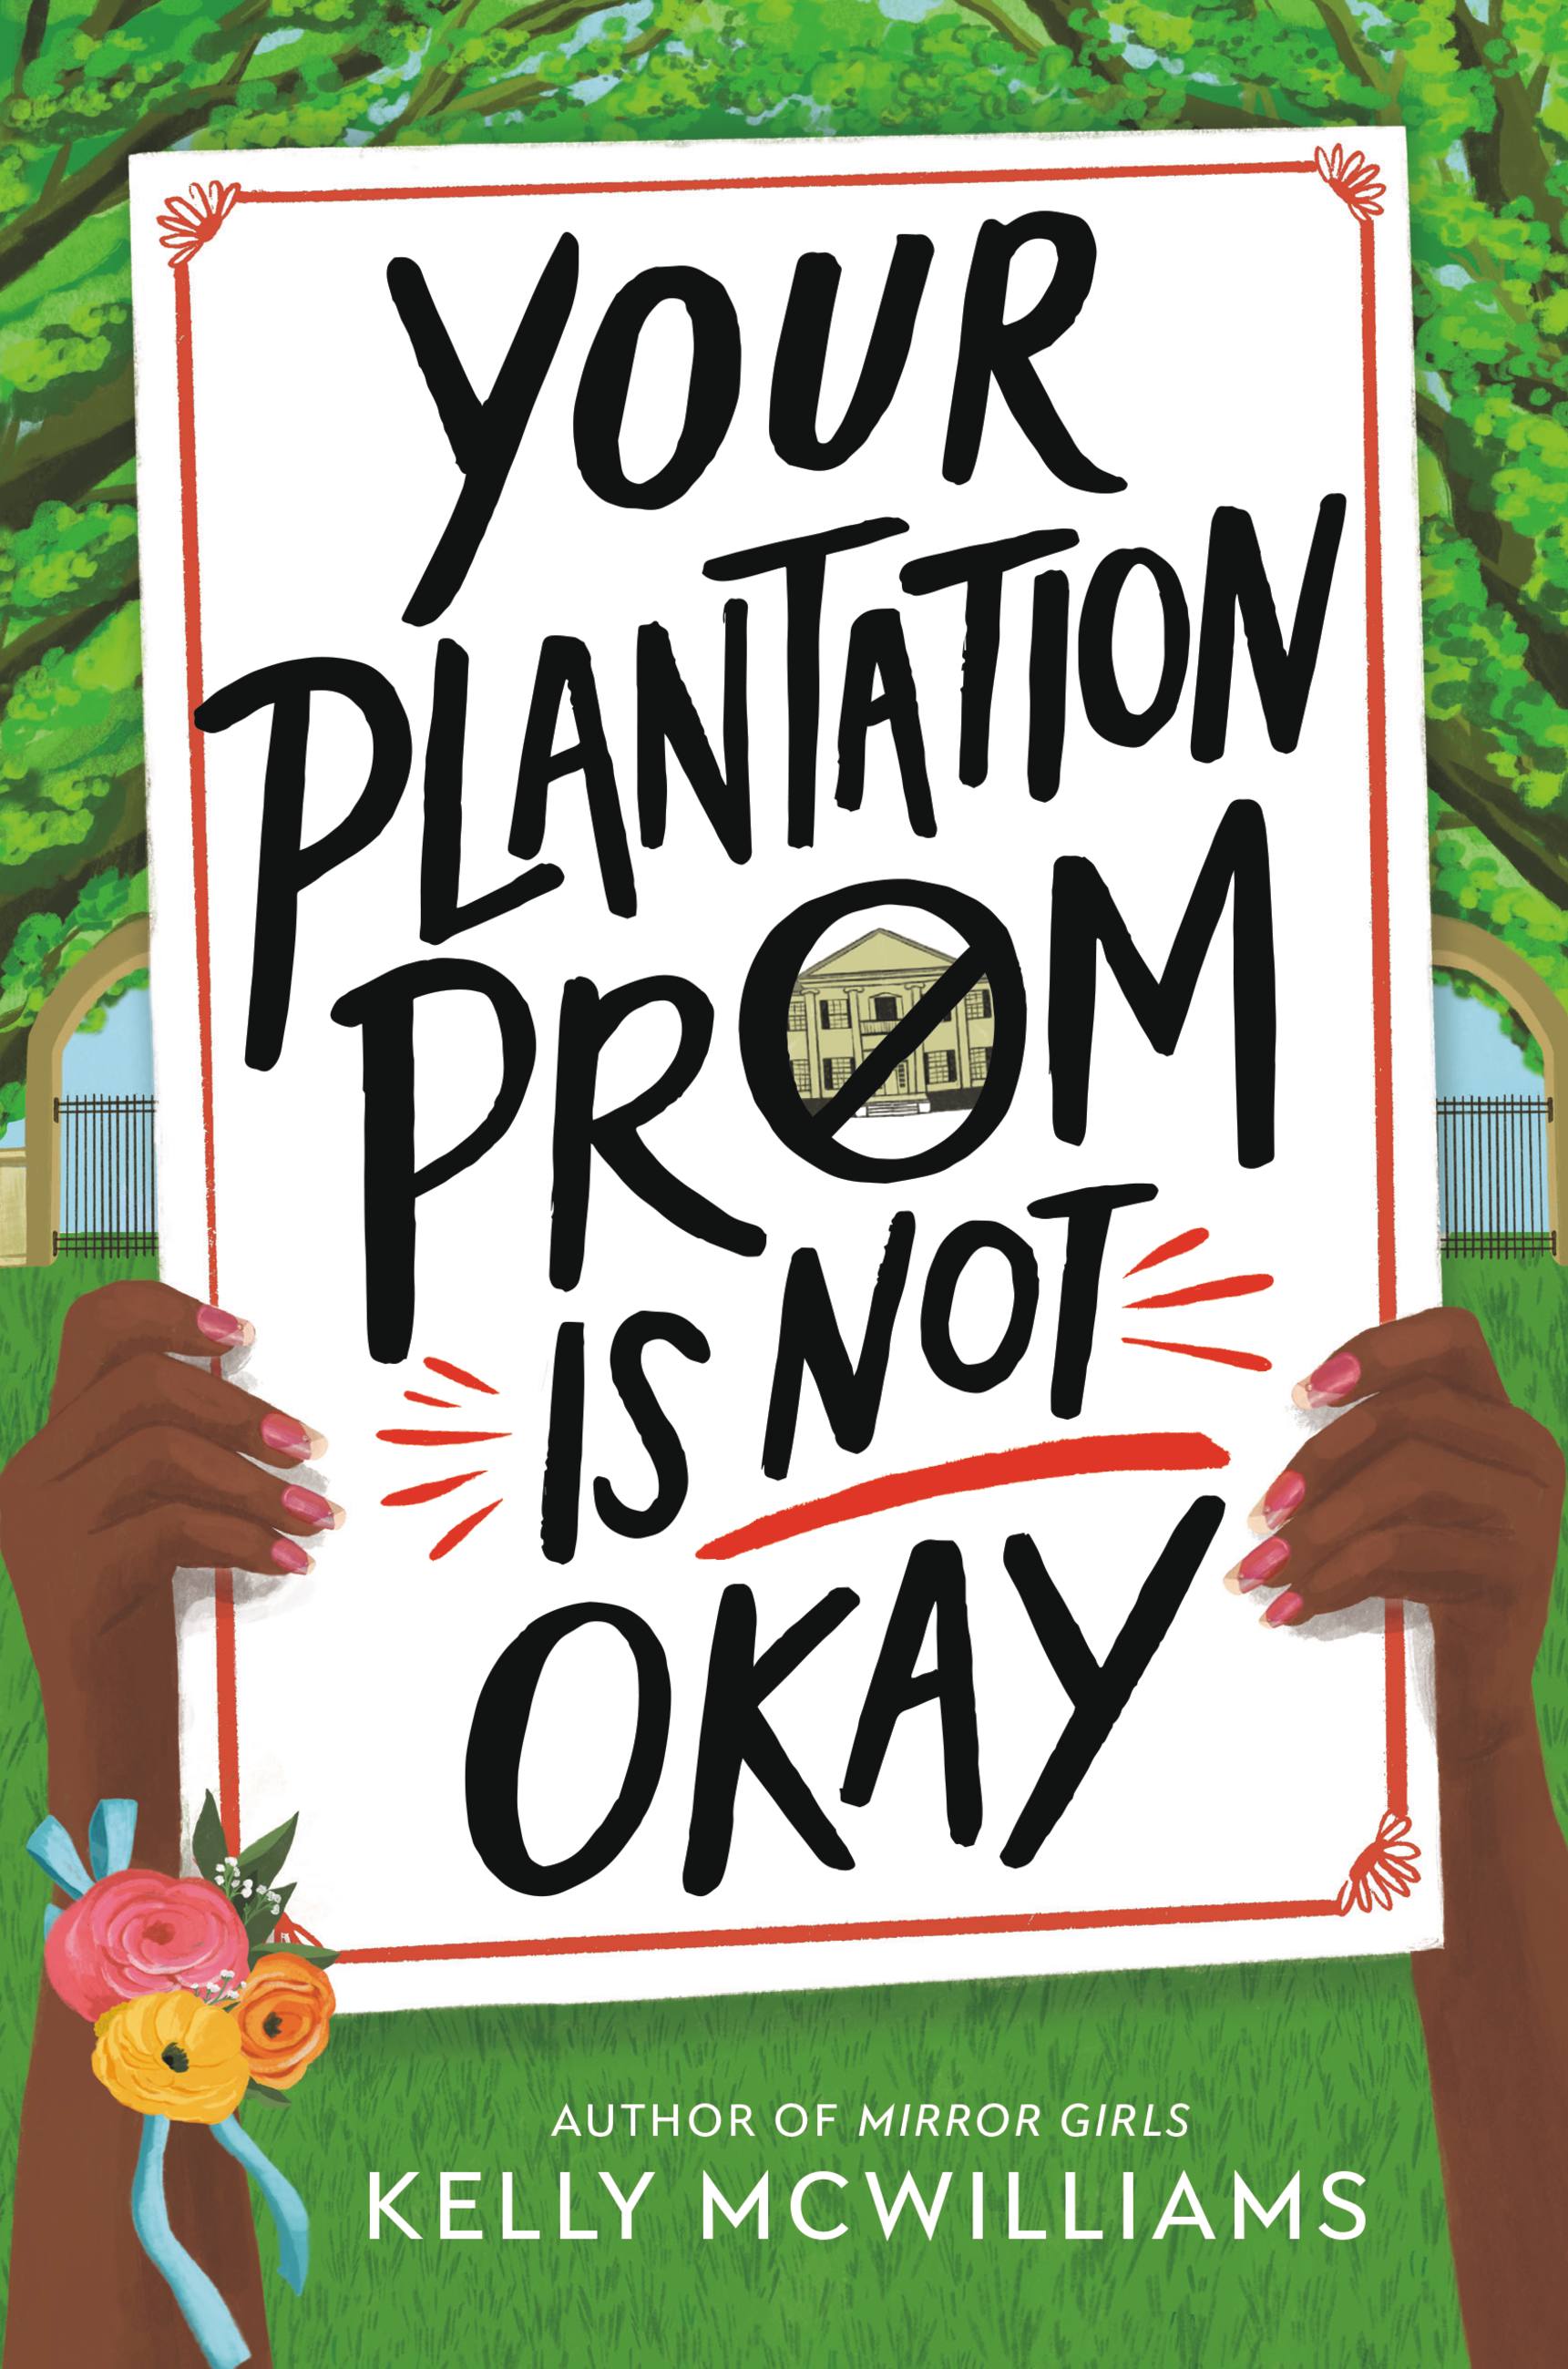 Your Plantation Prom Is Not Okay by Kelly McWilliams Hachette Book Group pic